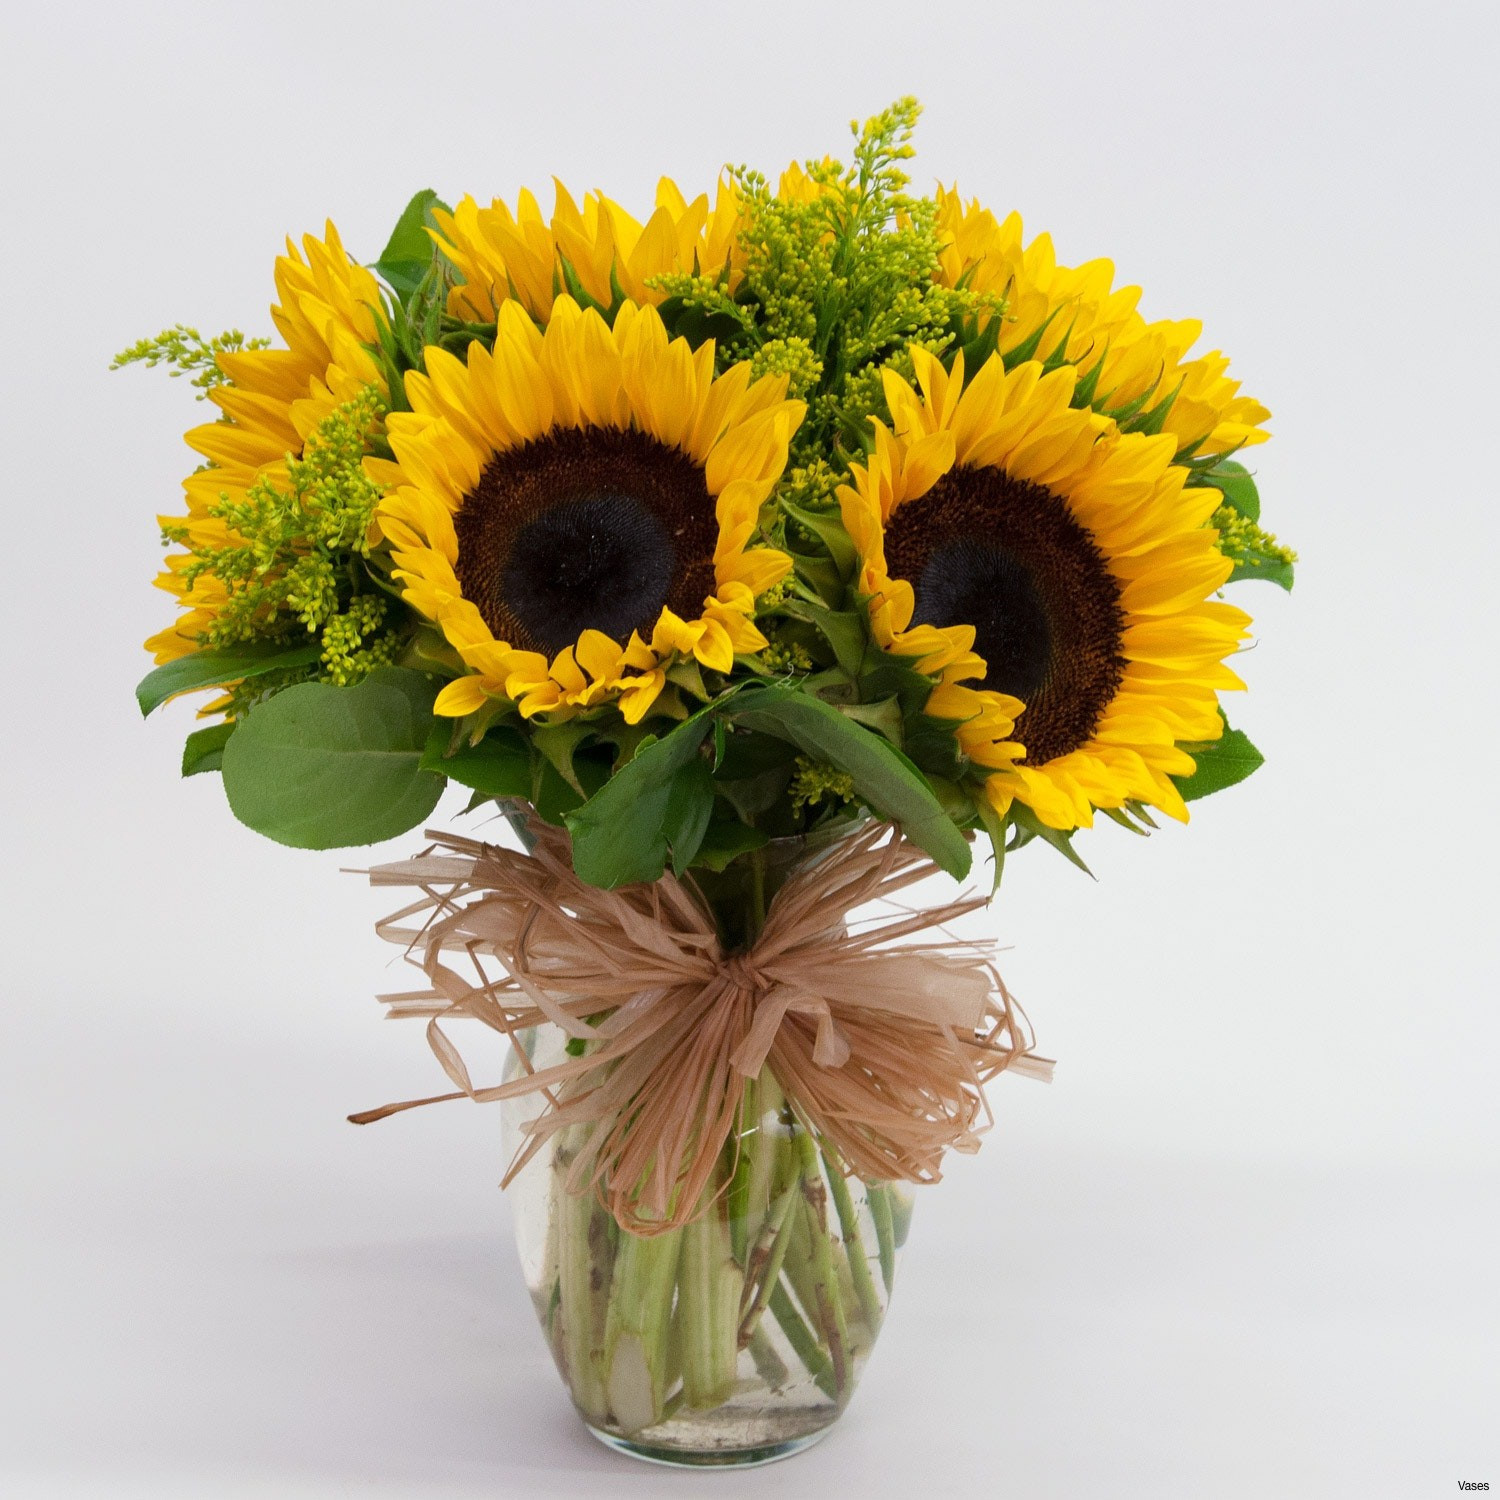 11 Unique Pictures Of Yellow Roses In A Vase 2024 free download pictures of yellow roses in a vase of sunflower images awesome yellow monday top ten yellow flowers within related post